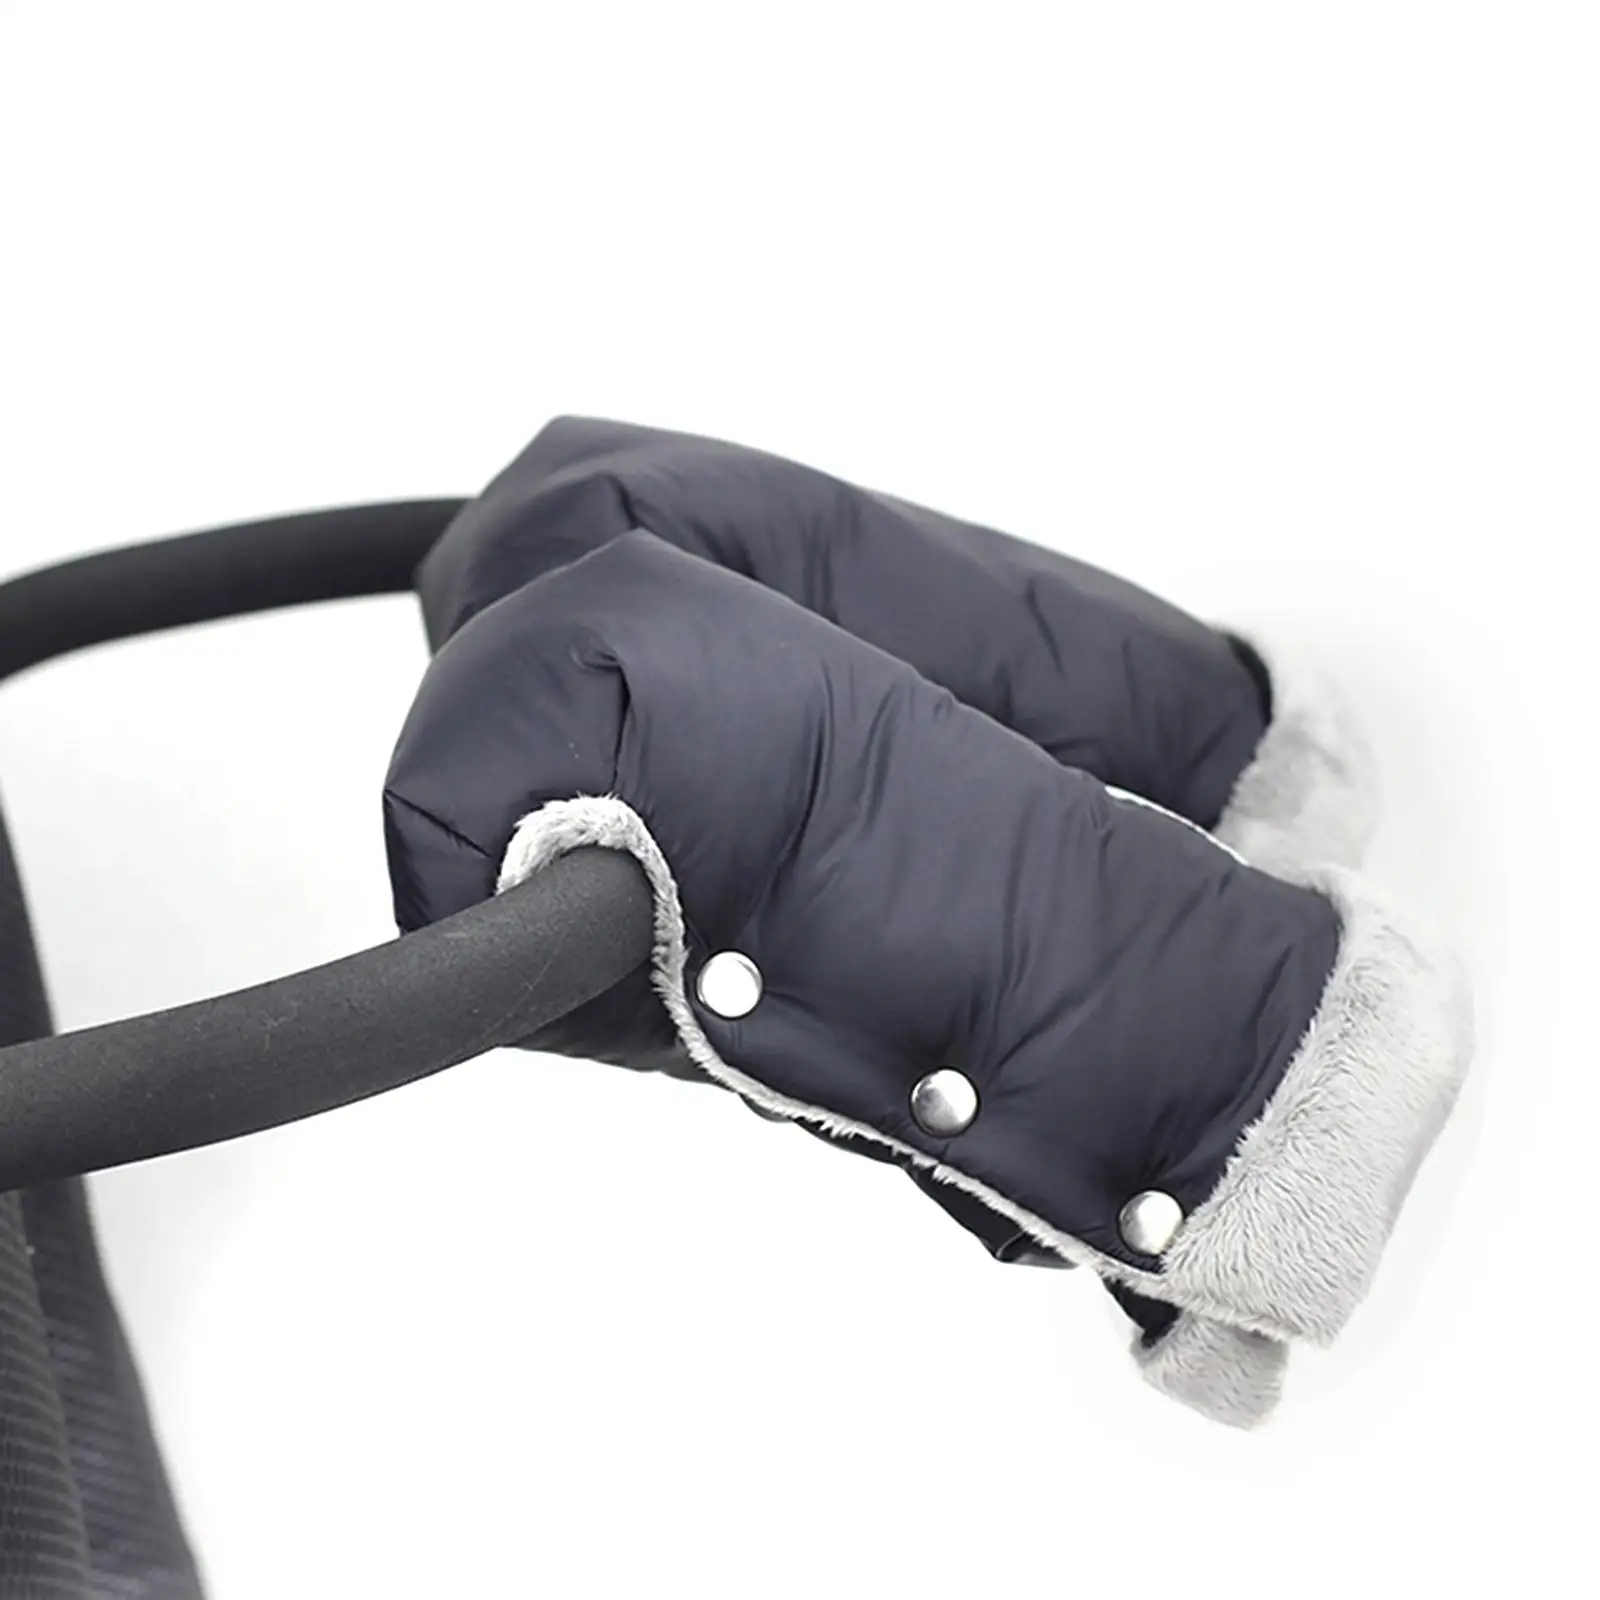 Cozy Hand Warmer for Strollers - Keep Your Hands Warm and Comfortable on Cold Days